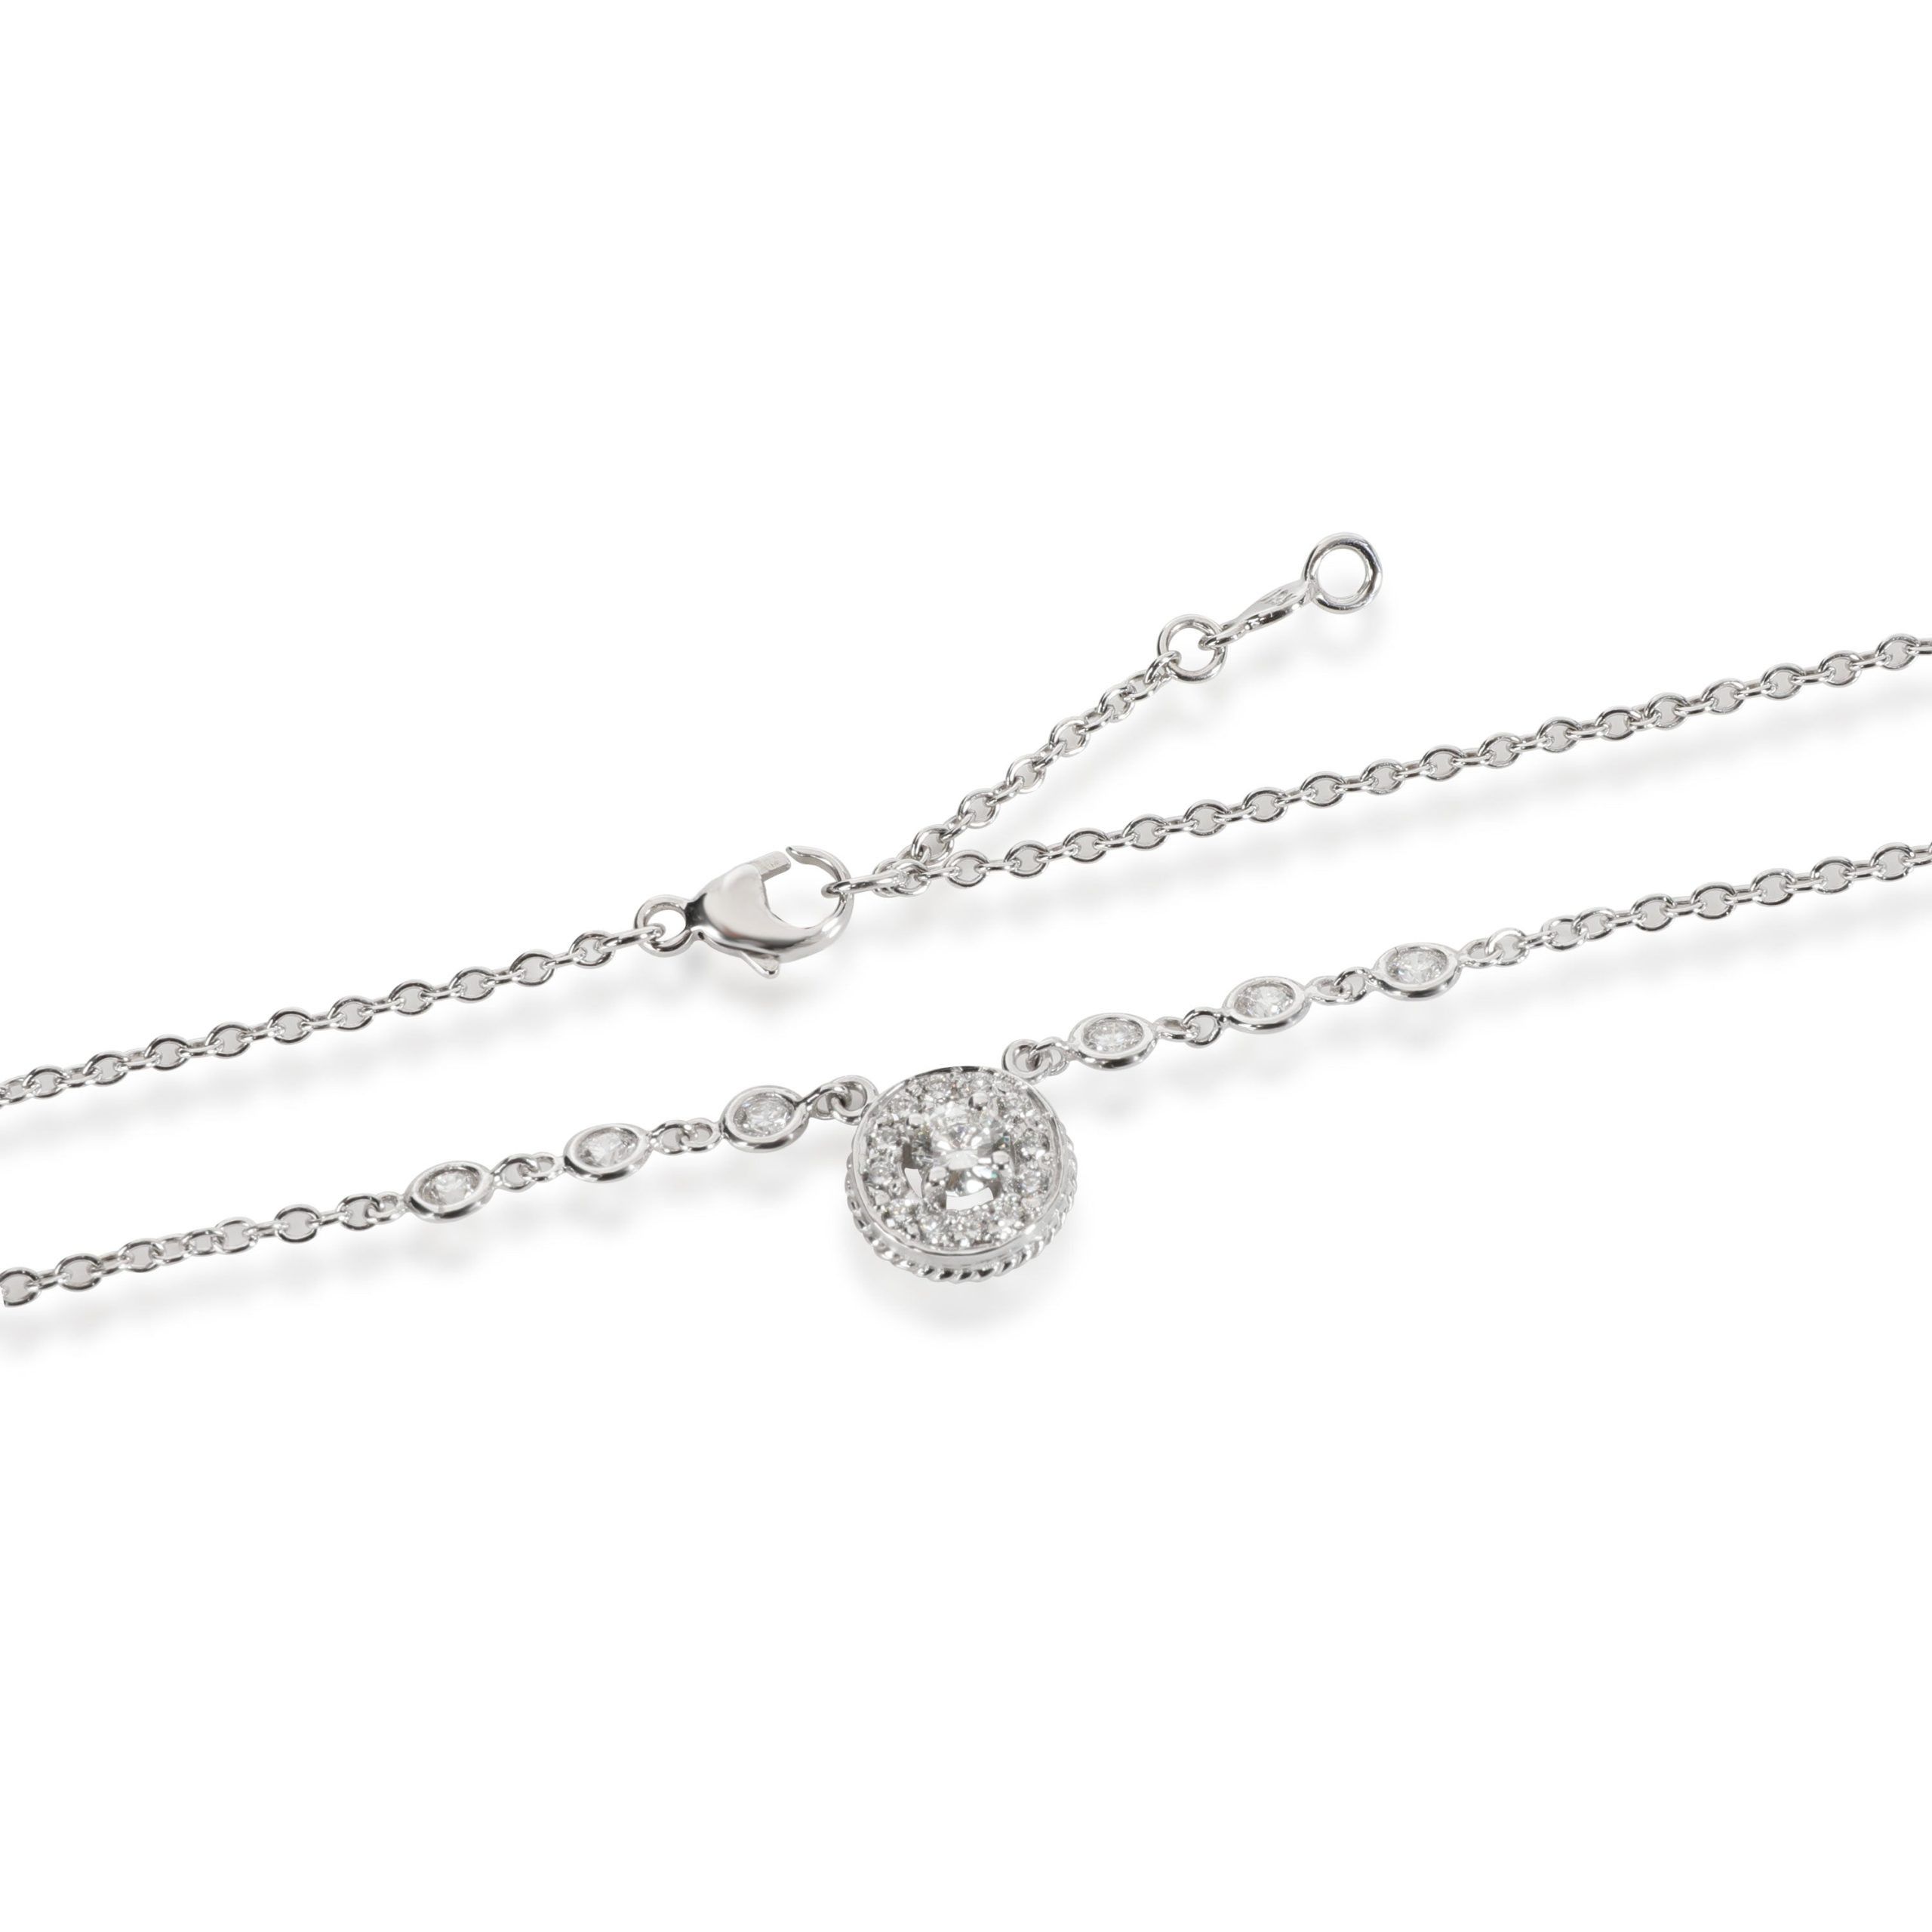 Halo Halo Diamond Necklace in 18K White Gold 0.67 CTW Size ONE SIZE - 3 Preview